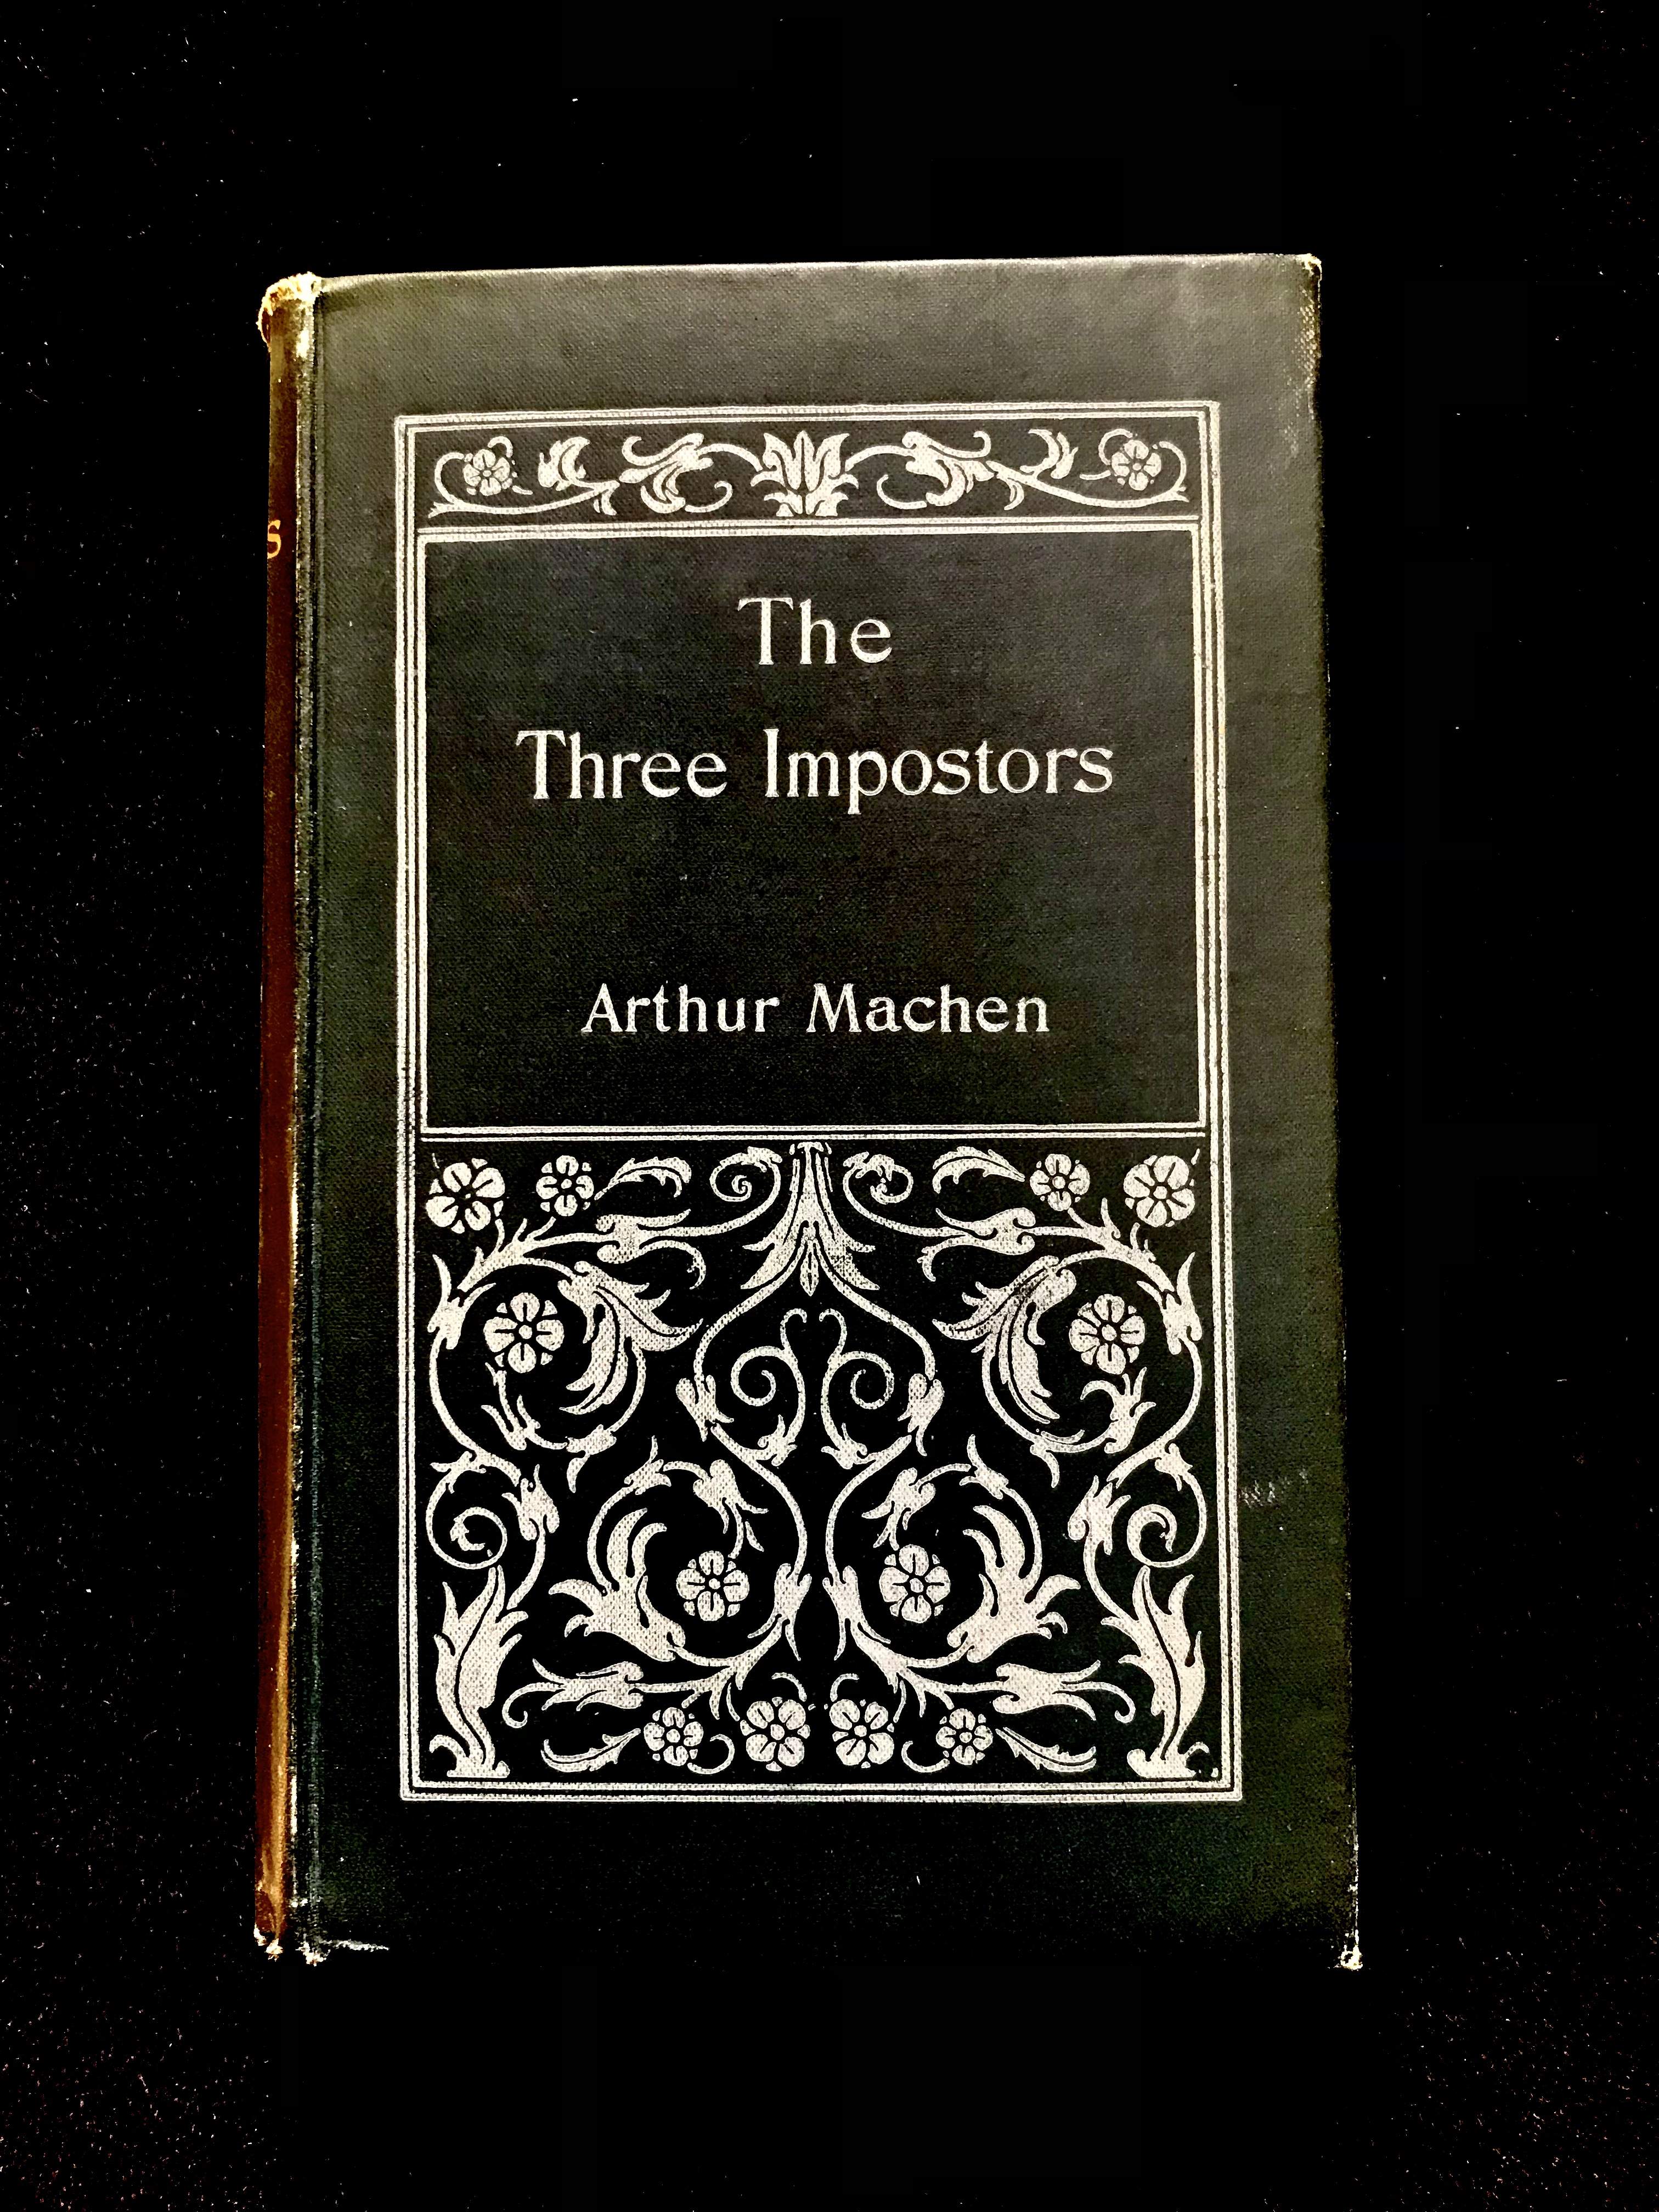 The Three Imposters, or The Transmutations by Arthur Machen